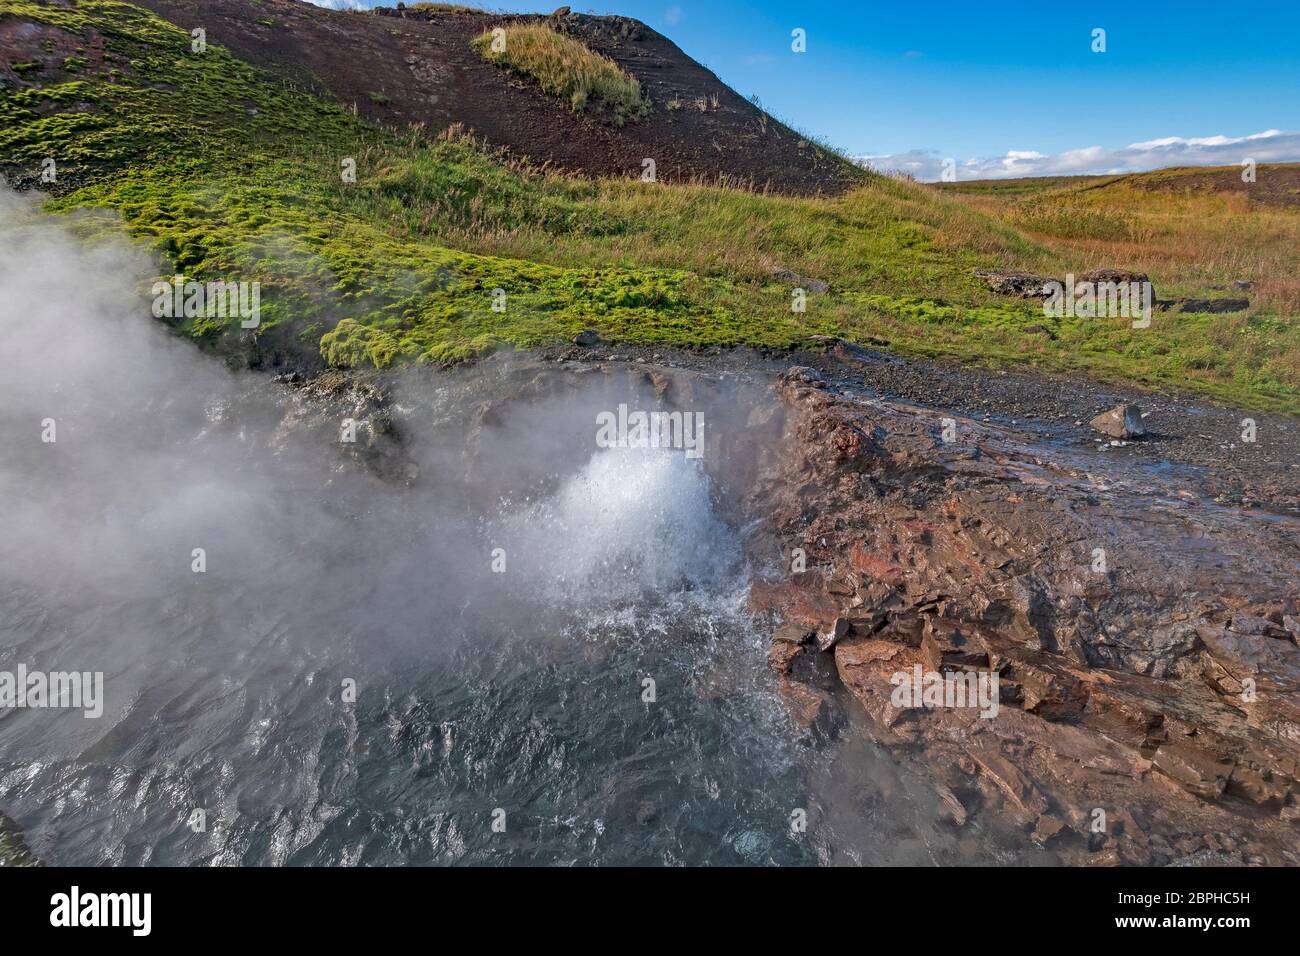 Deildartunguhver Hot Spring in the Countryside of Iceland Stock Photo